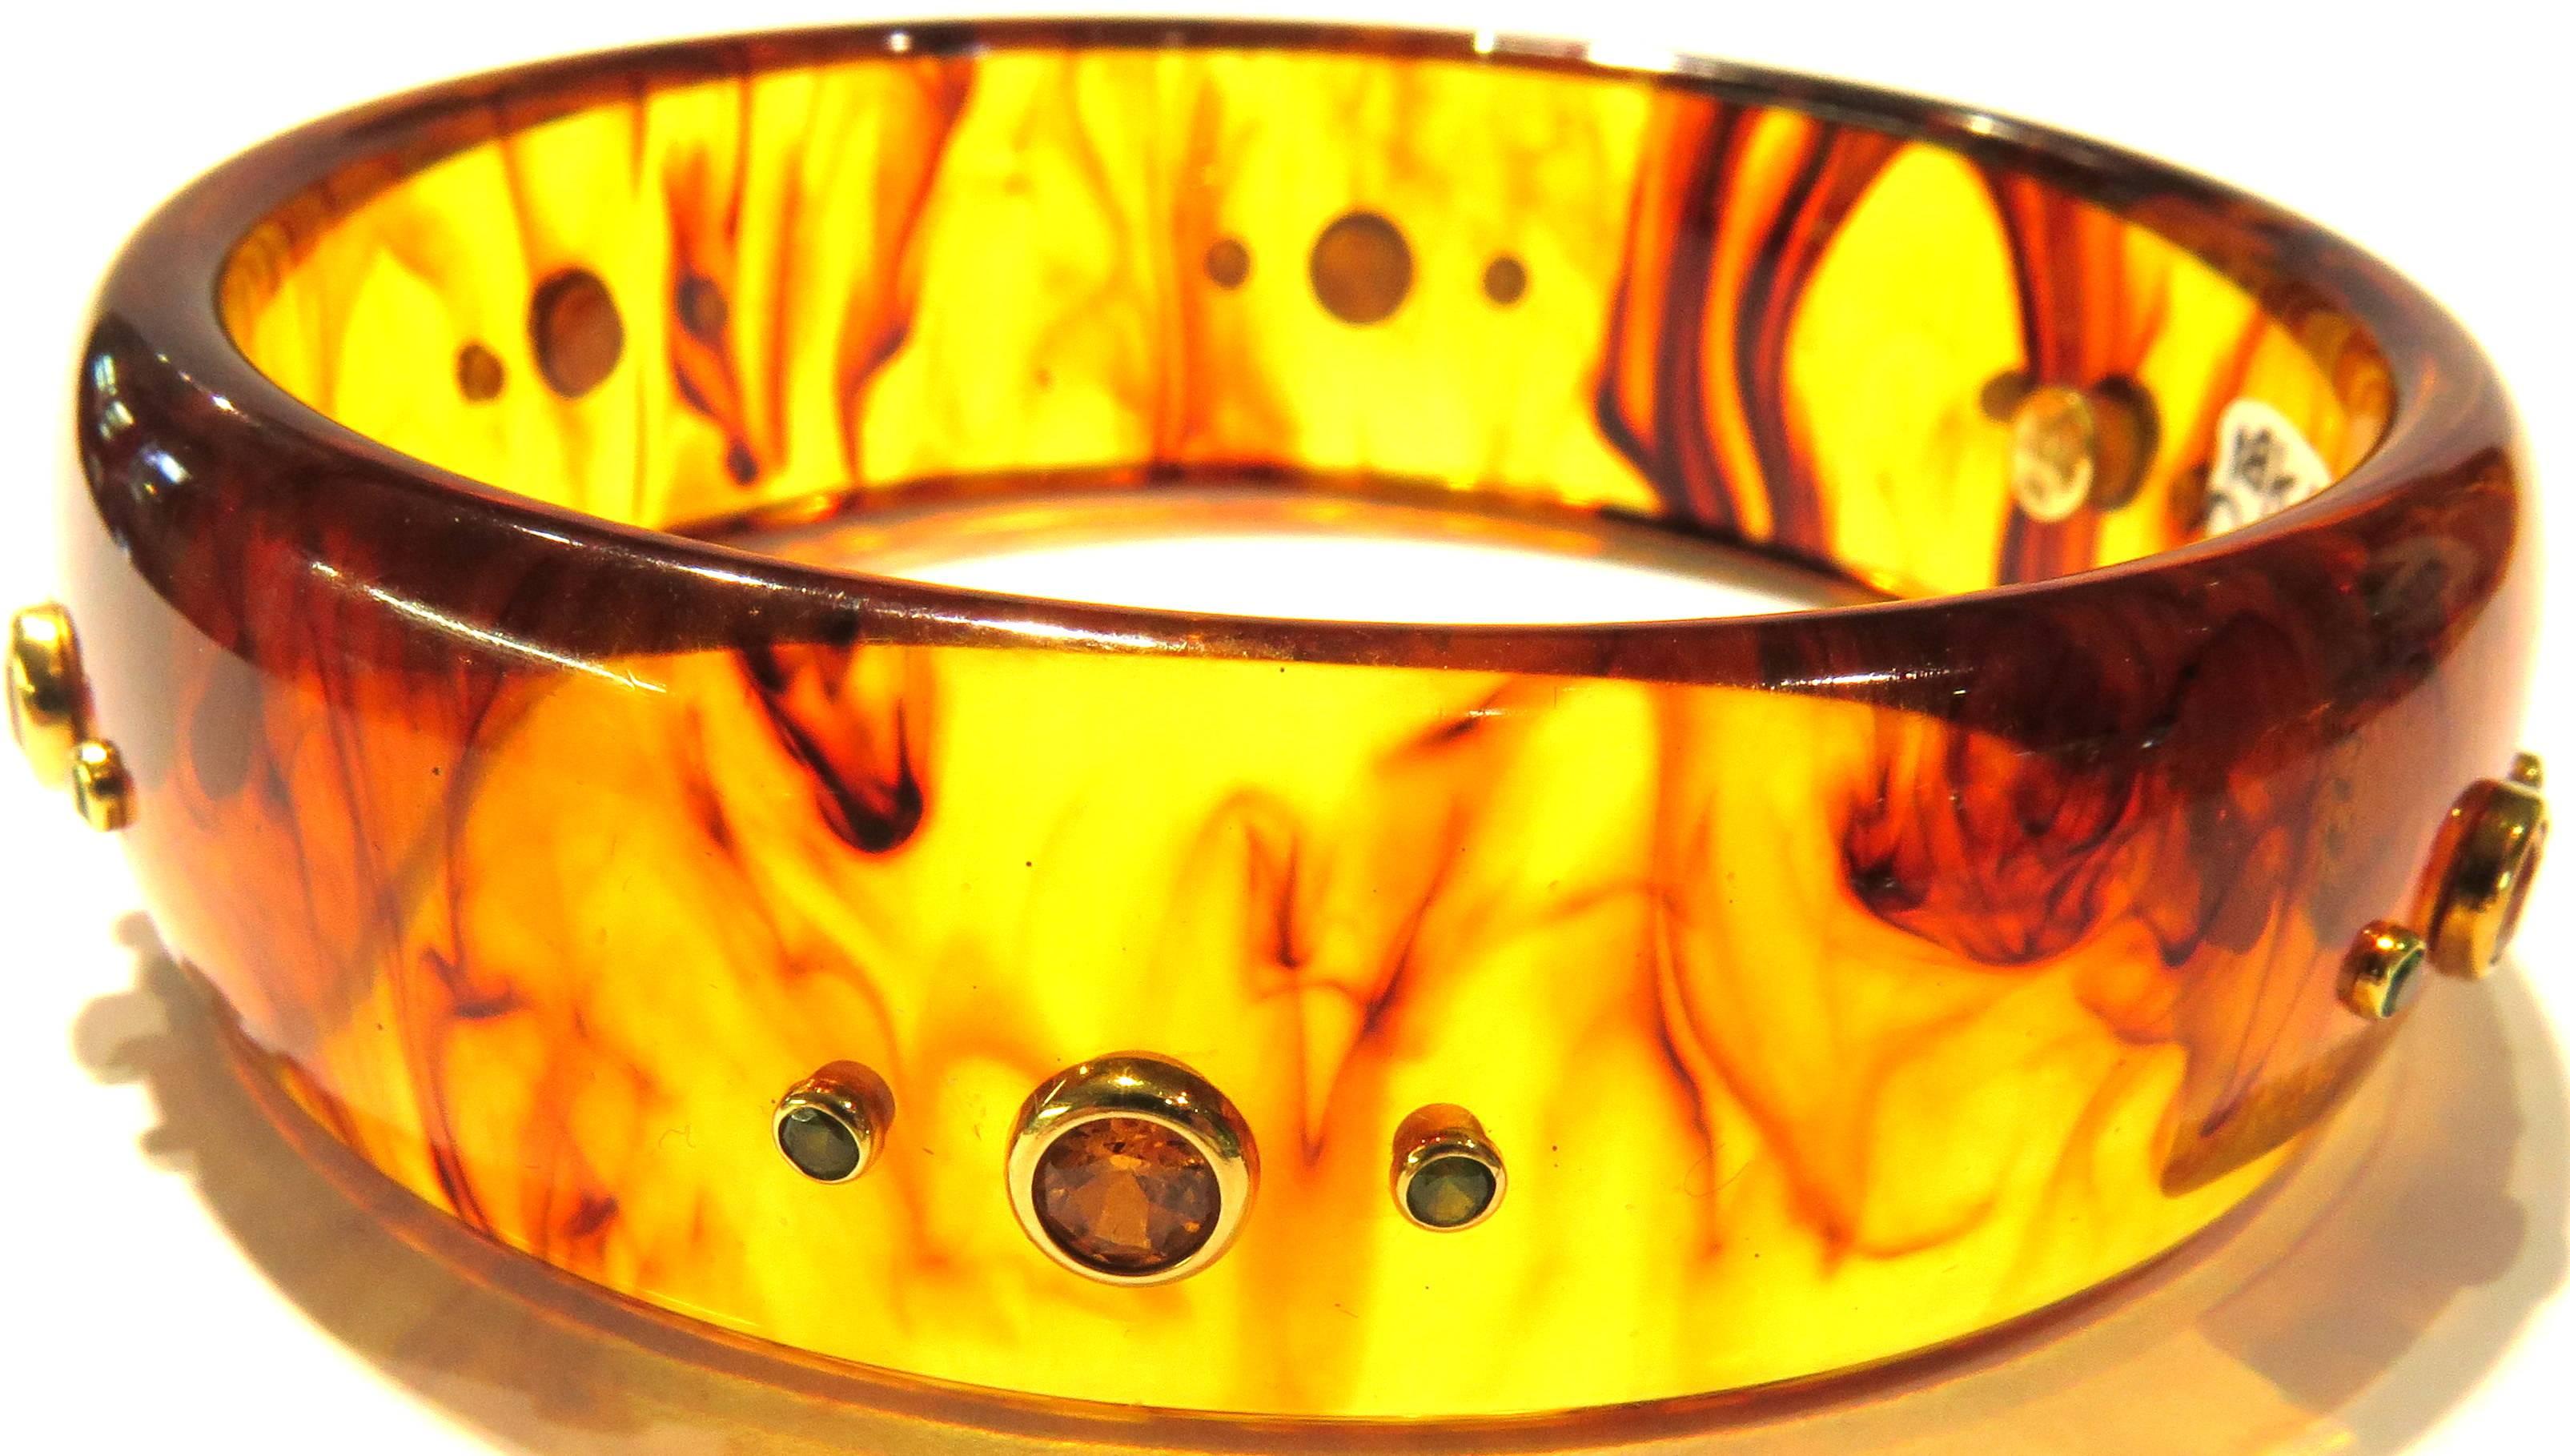 This is a Mark Davis 18k resin/tortoise-Bakelite bangle bracelet. There are 6 sets of 3 gemstone clusters. The signature is found inside the bracelet.
This bracelet measures 2 3/4 inch inside-across the perimeter. 
This bracelet weighs 31.1